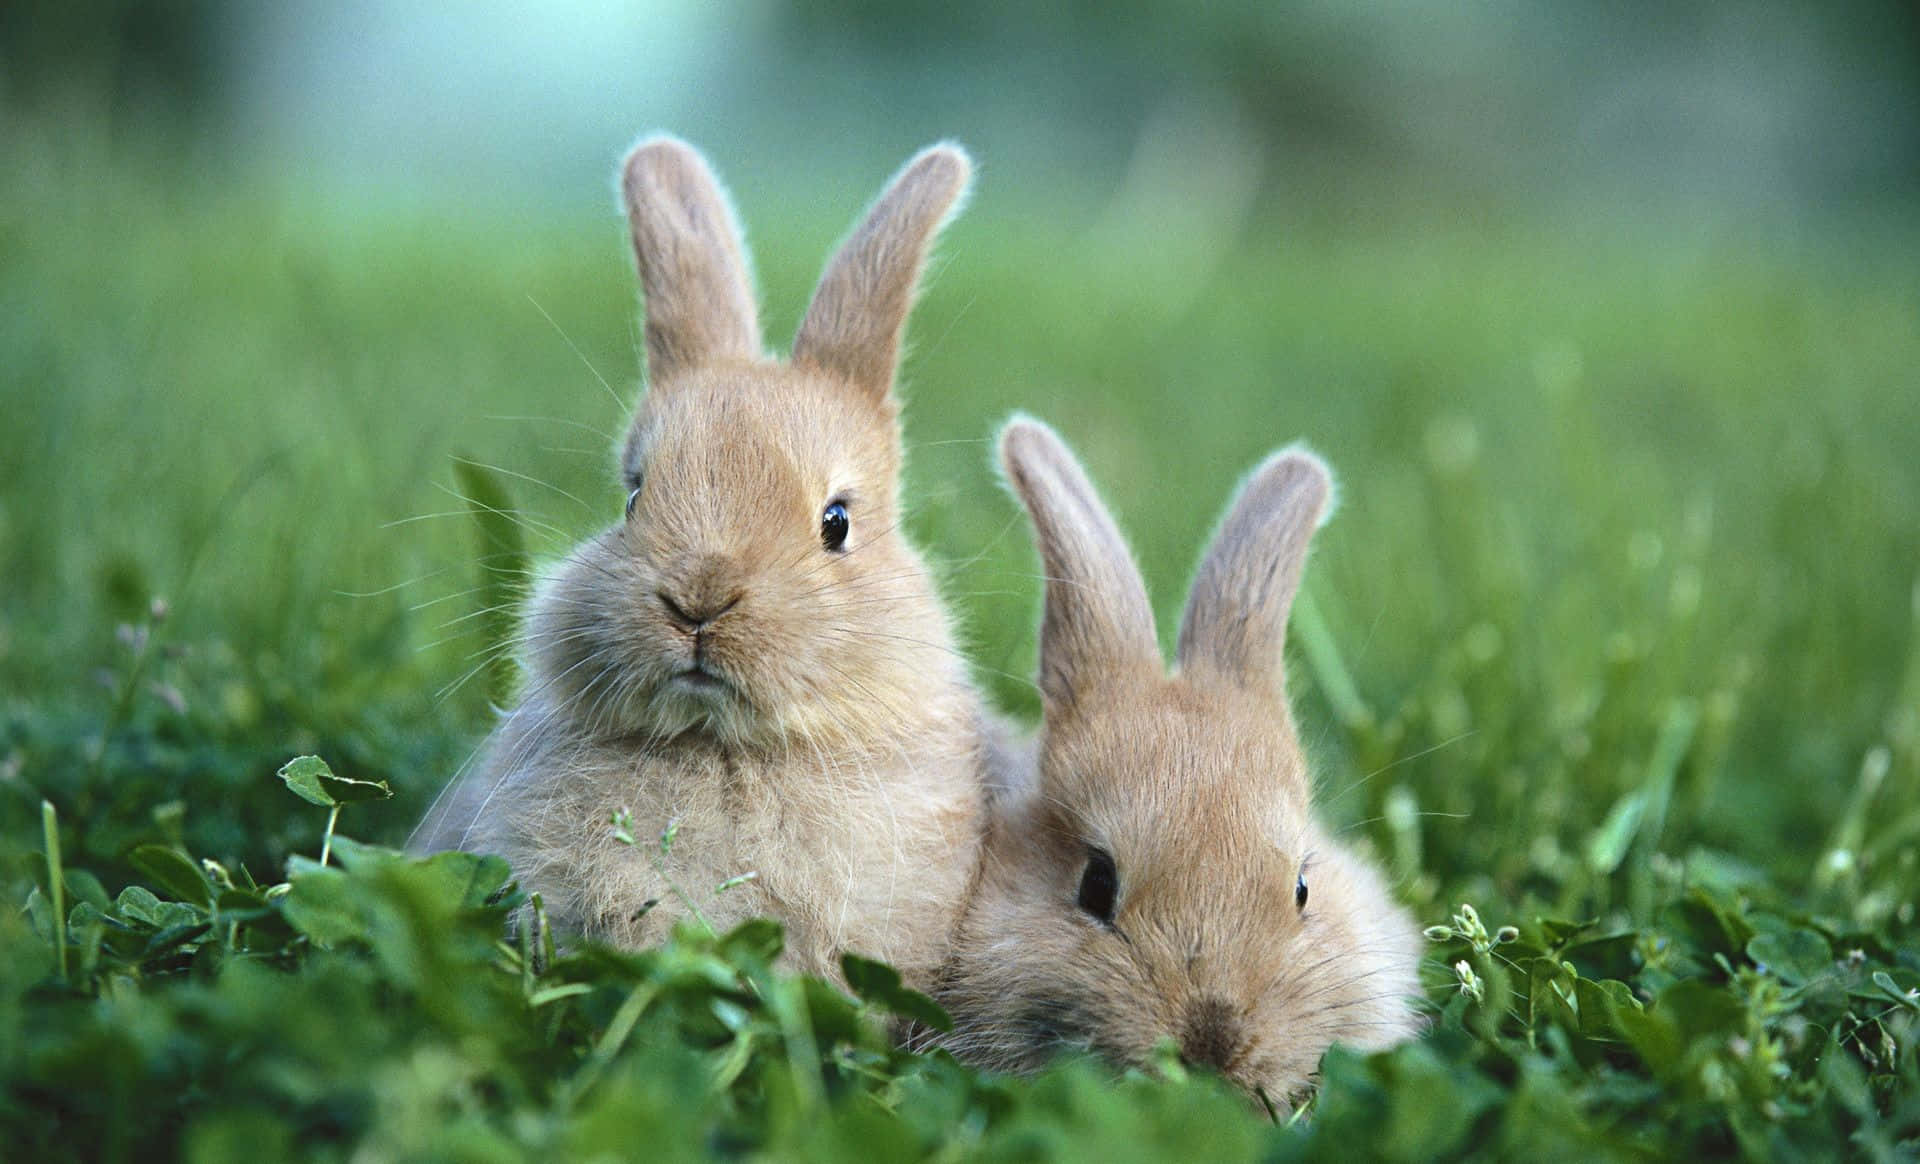 A sweet, brown and white bunny stands out in front of a green background